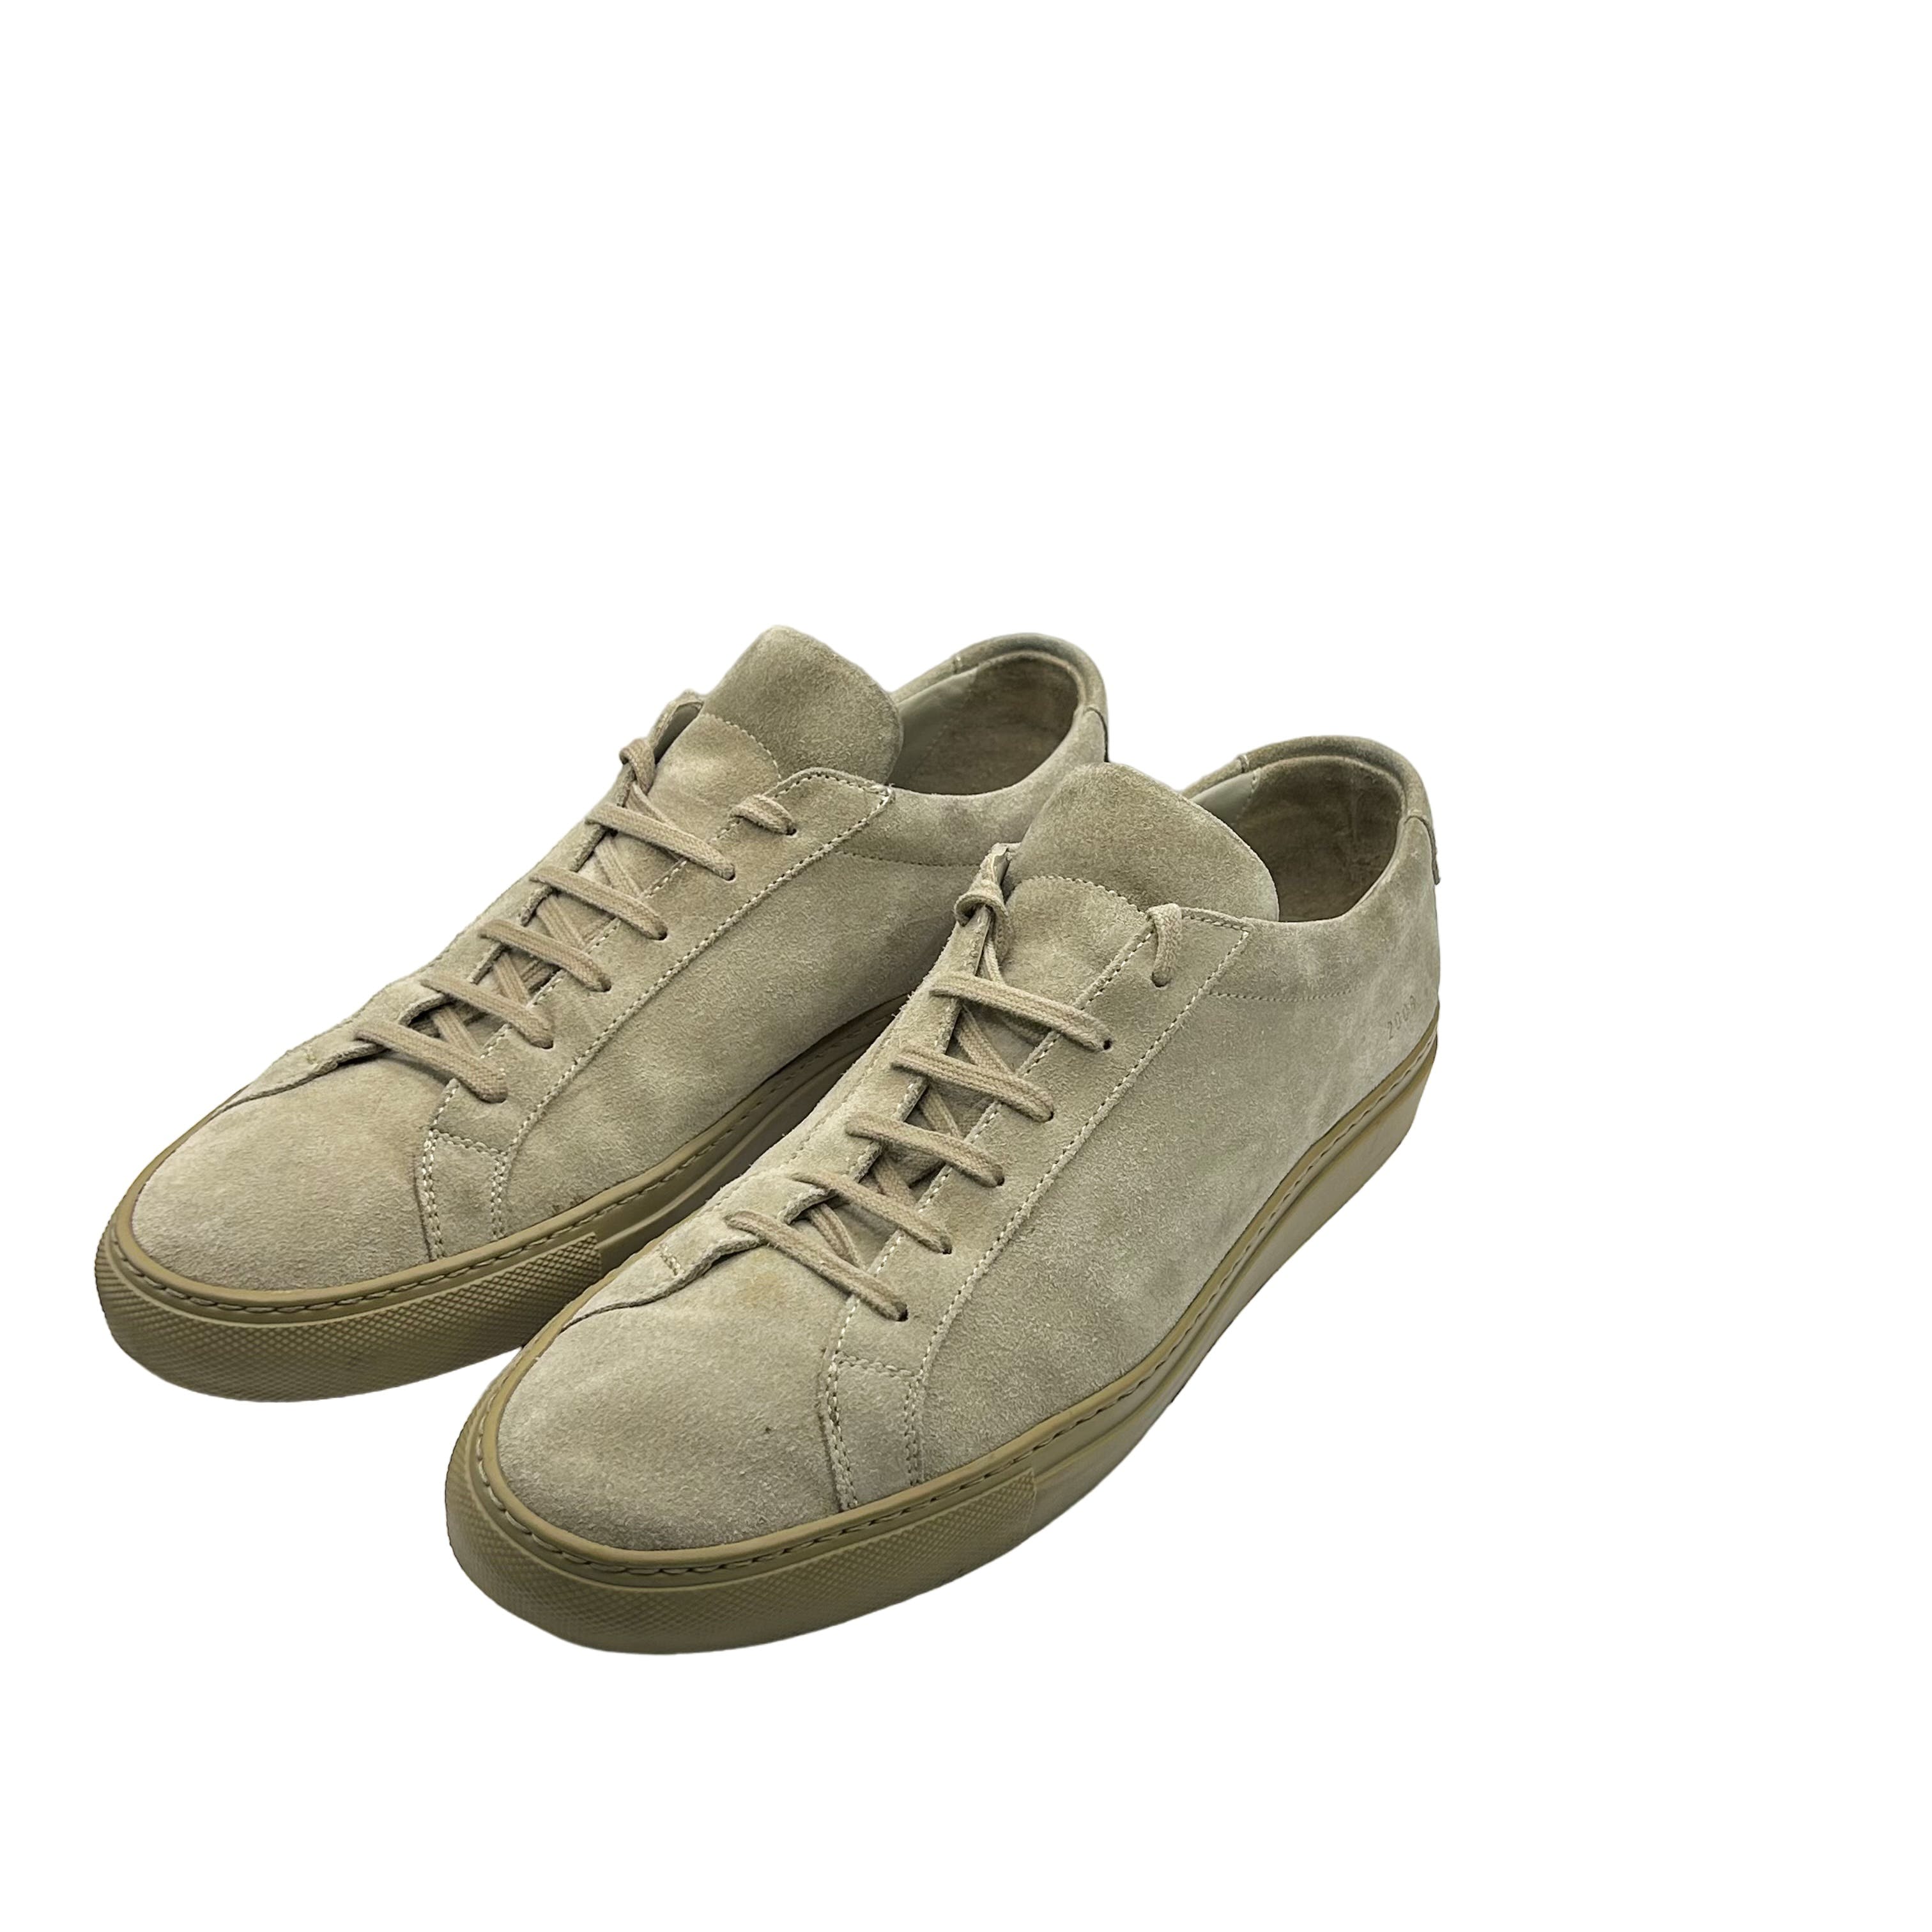 Taupe Suede Achilles Low Sneakers - 11